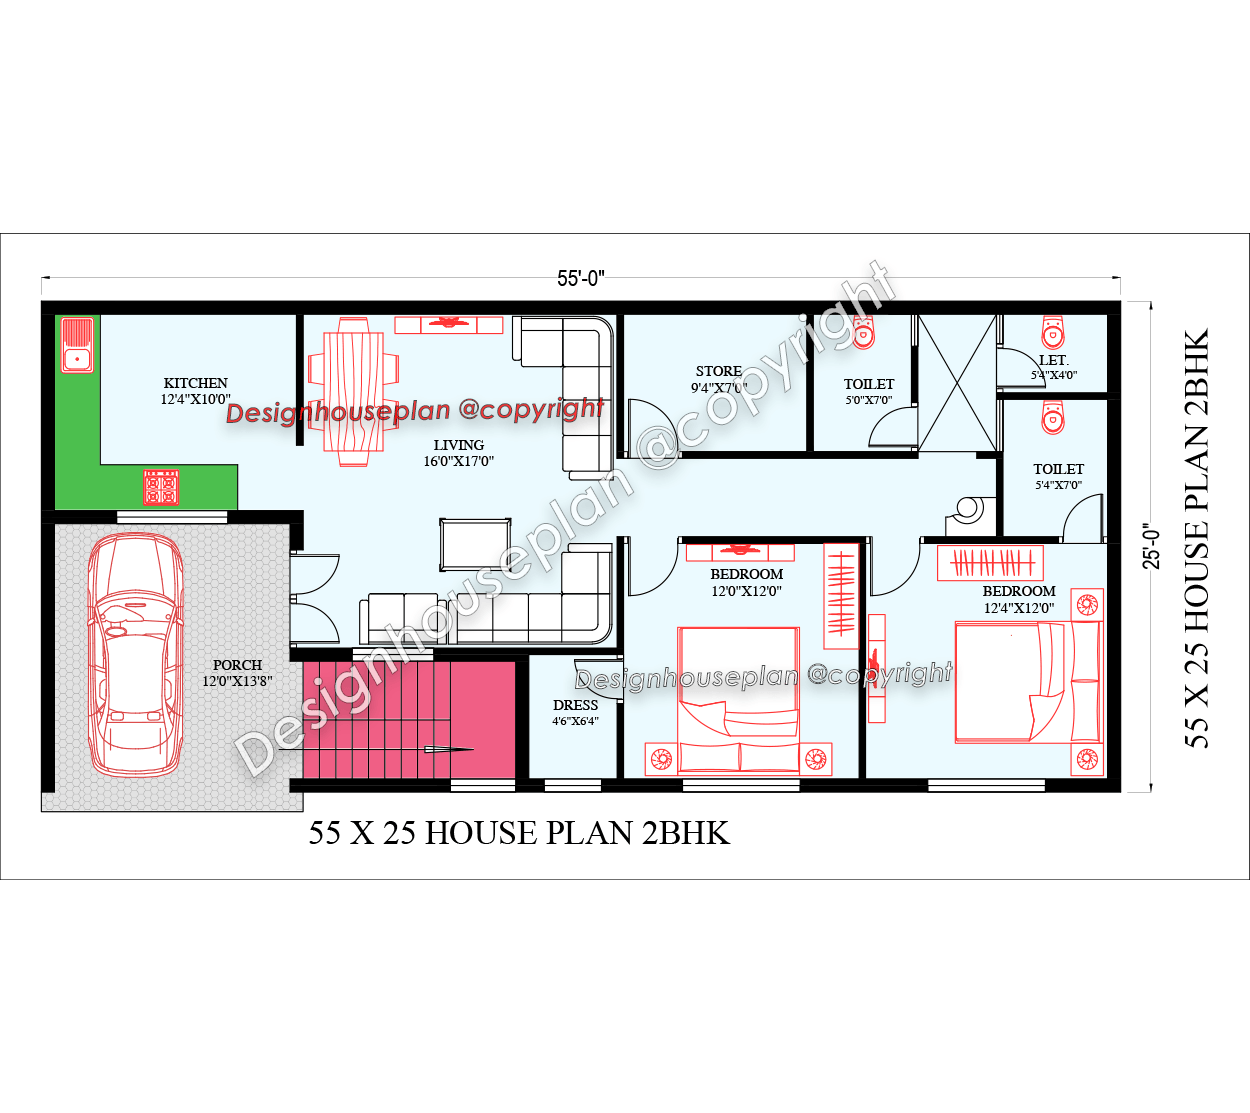 55X25 affordable house design